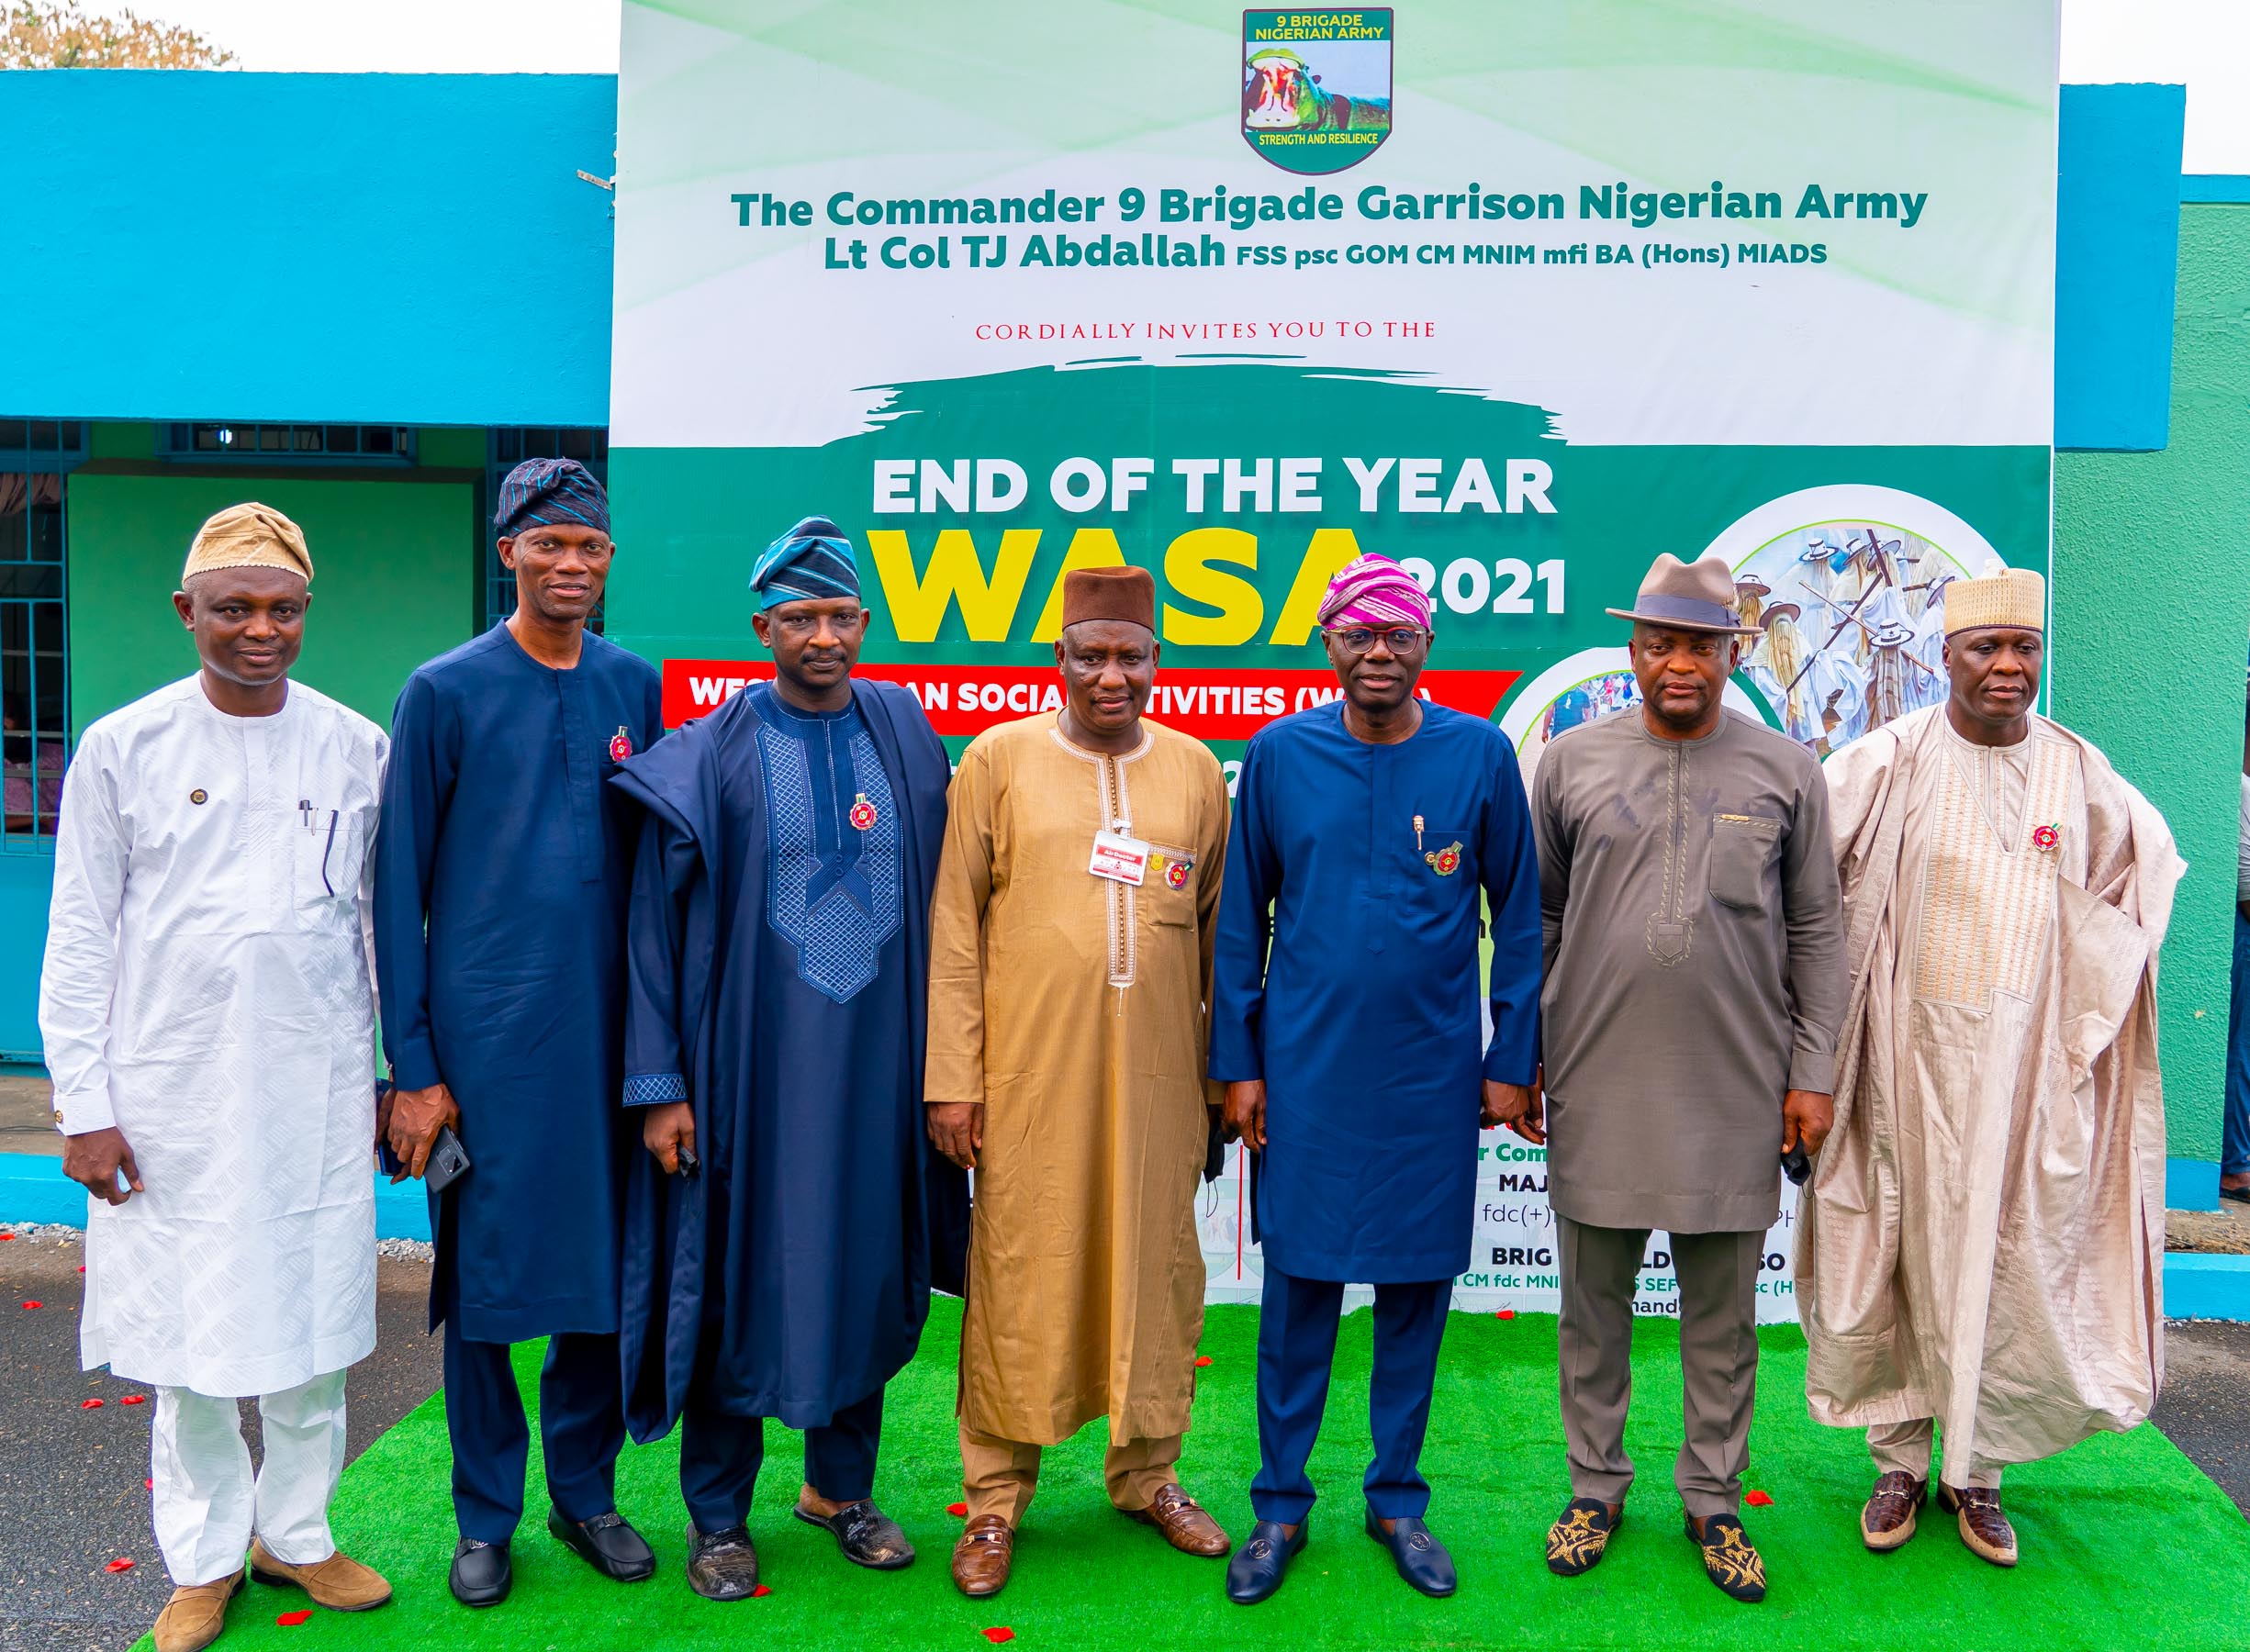 Photos: Gov. Sanwo-Olu Attends The Nigerian Army (9 Brigade) 2021 West African Social Activities (WASA) At 9 Brigade Garrison Parade Ground, Nigerian Army Cantonment, Ikeja, On Saturday..